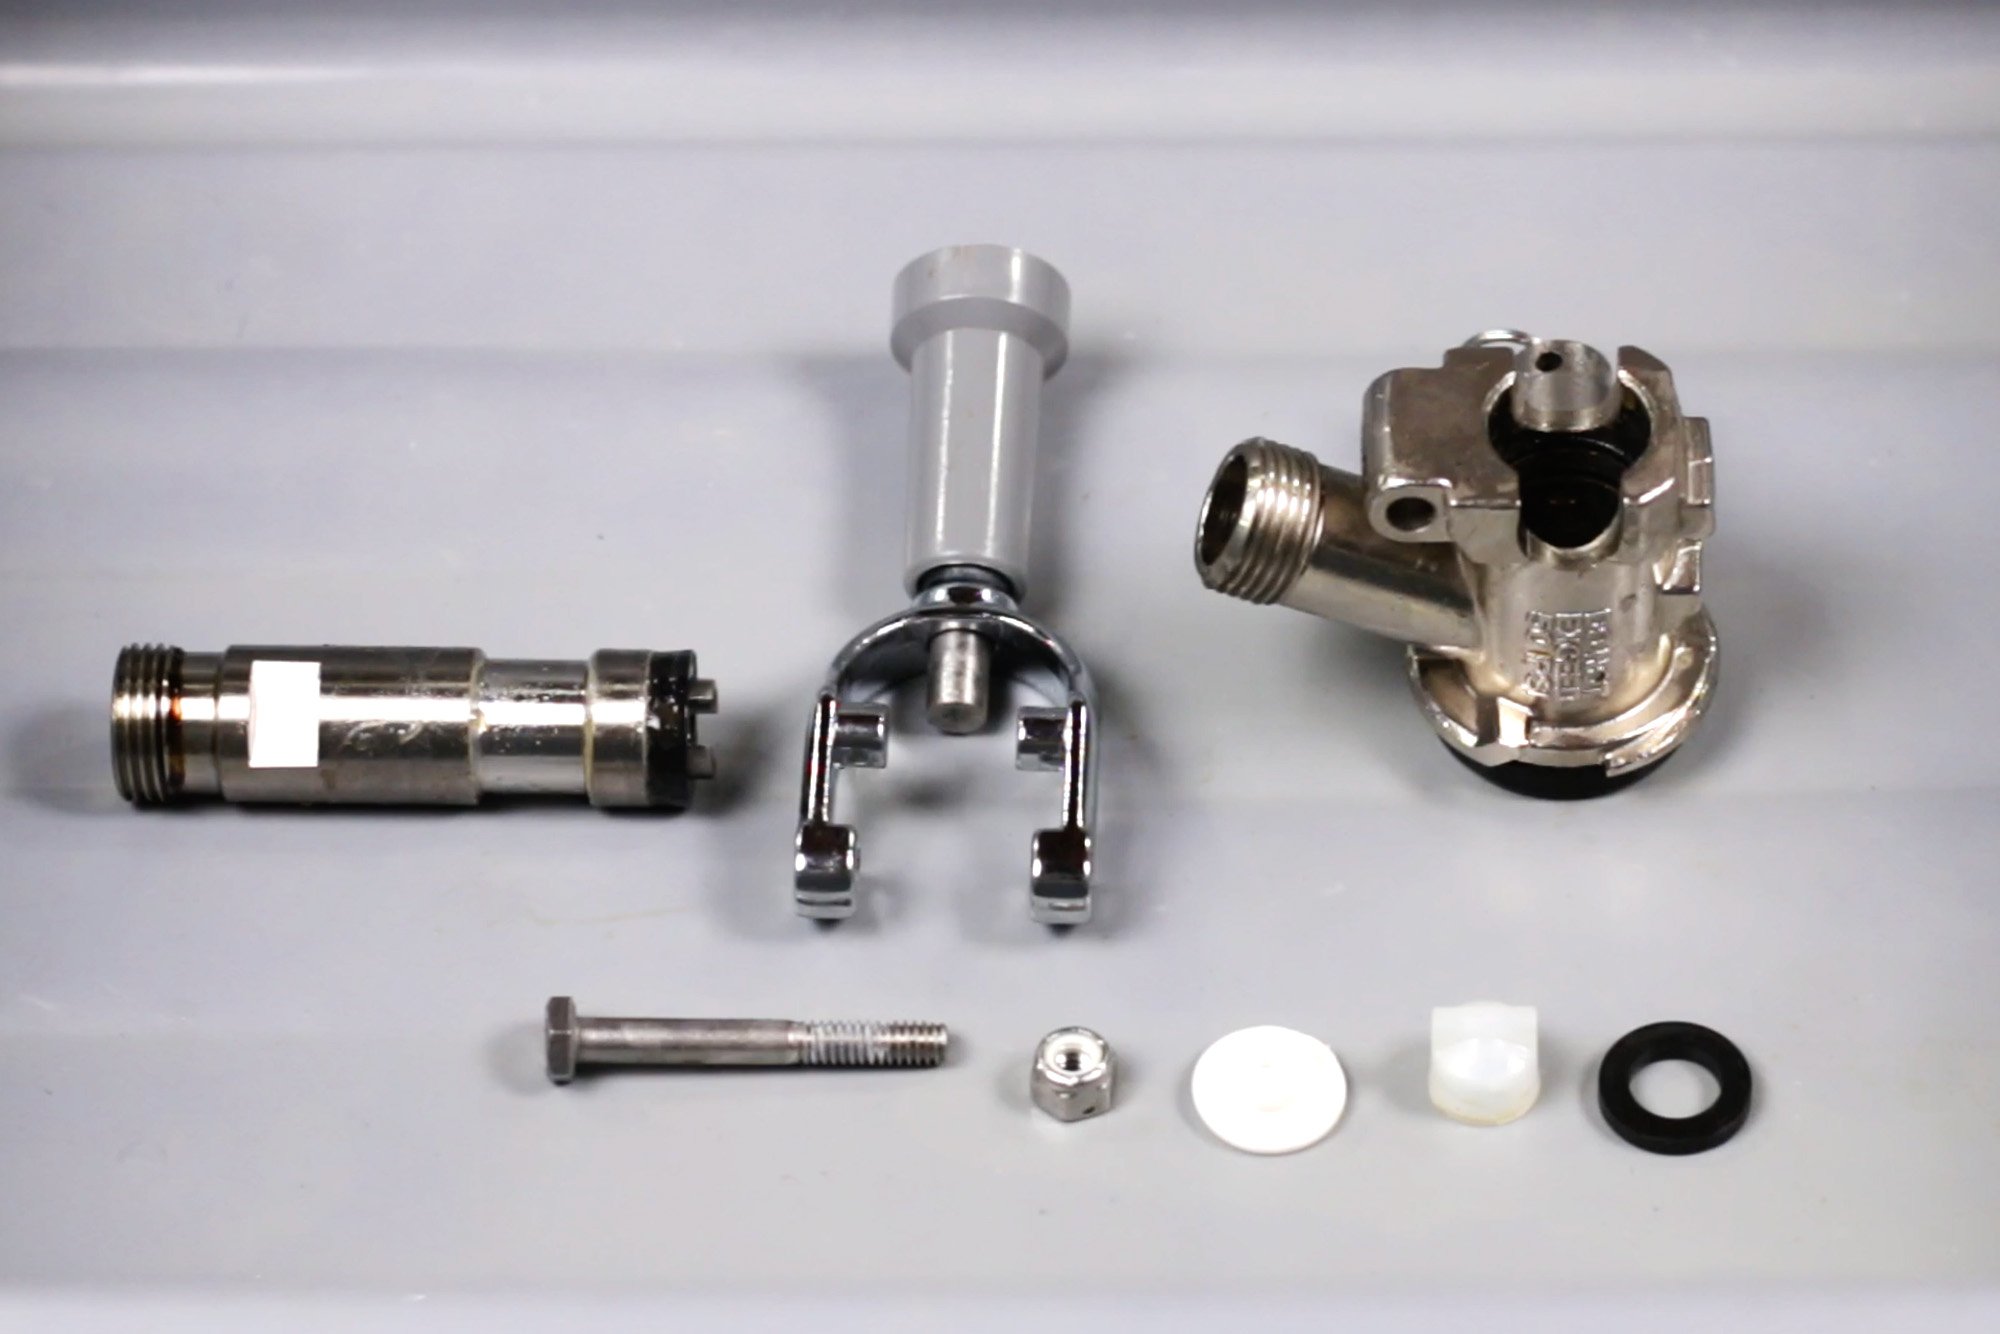 disassembled keg coupler after cleaning